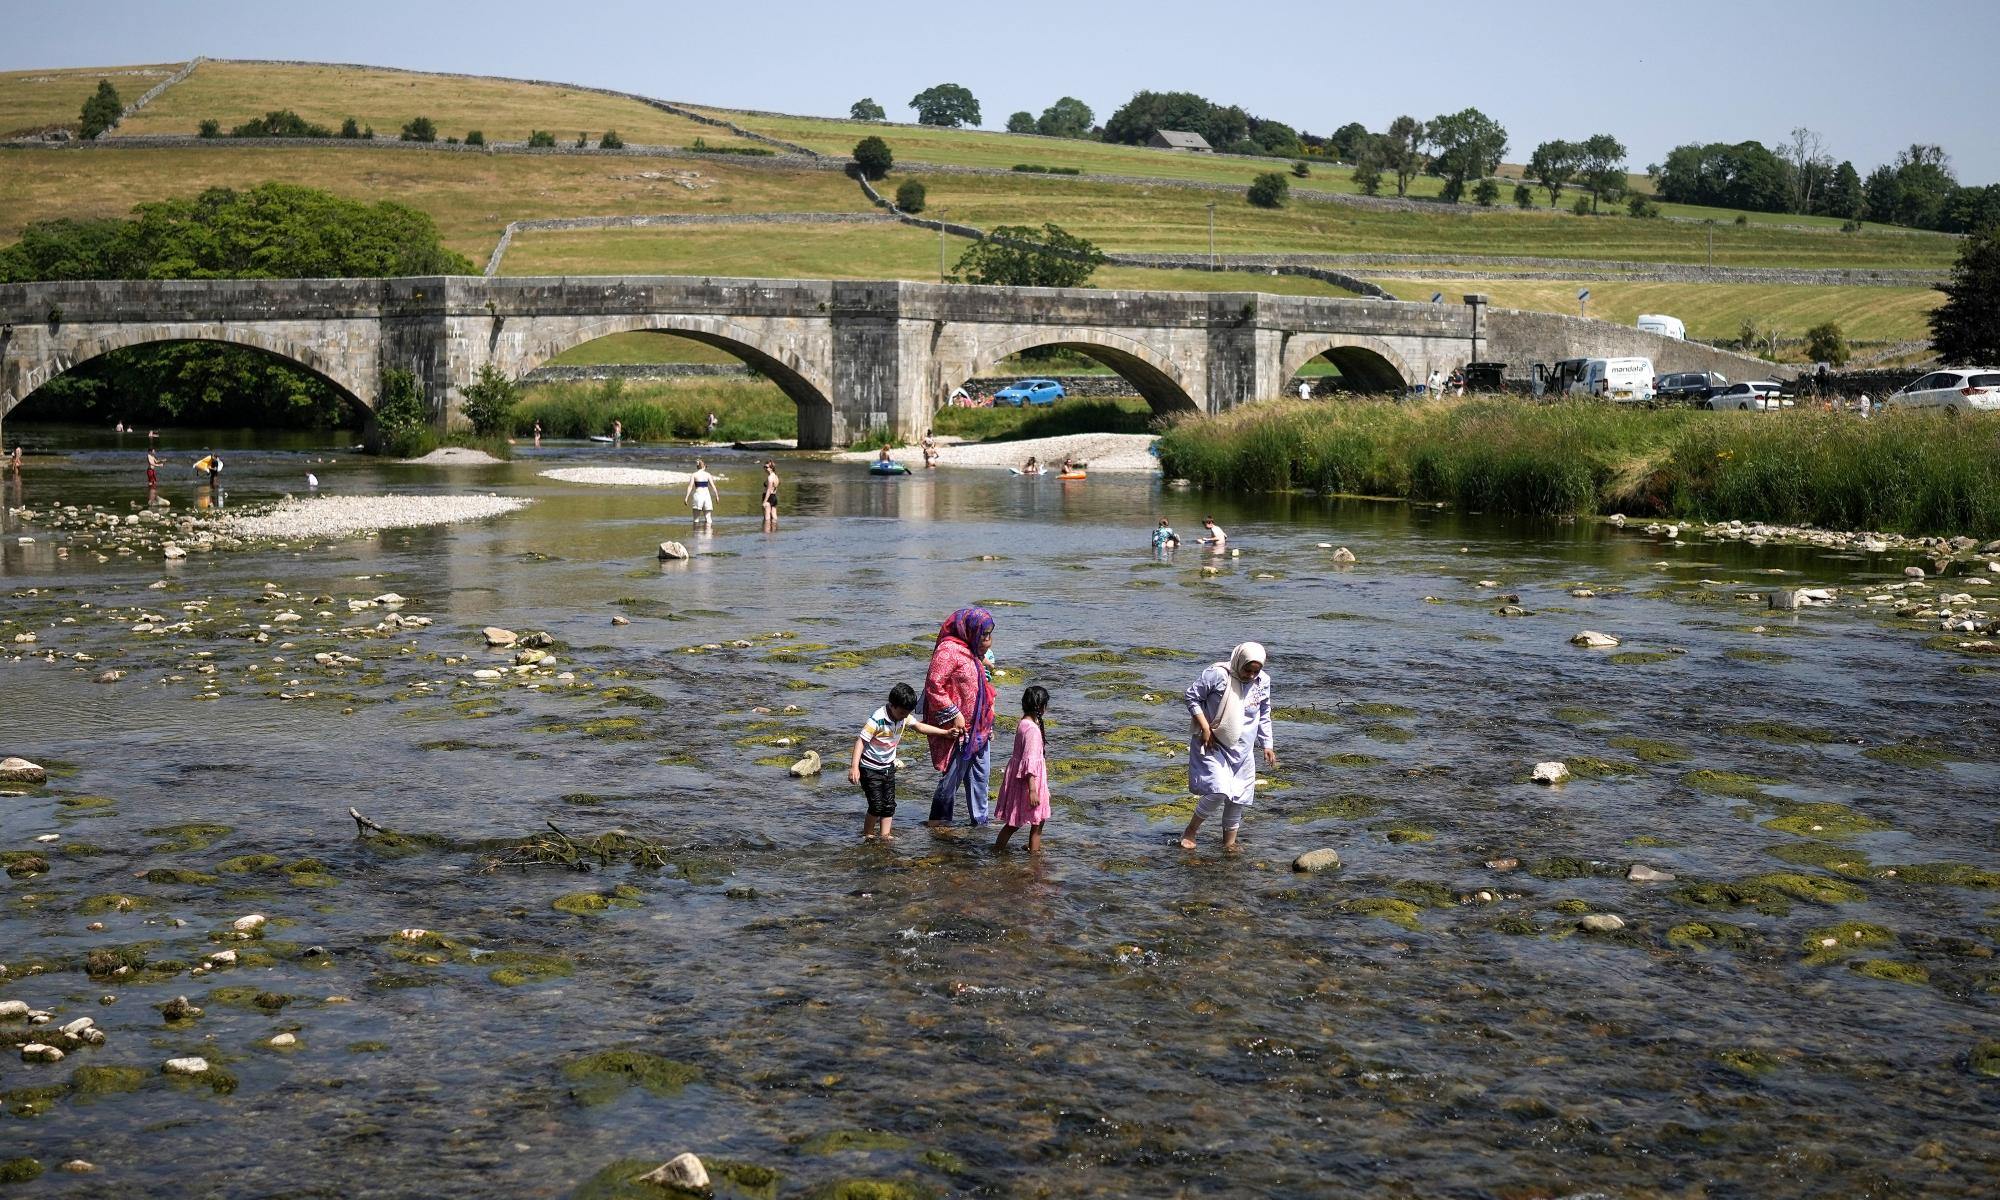 River-flow rates in England at lowest point since 2002, data shows